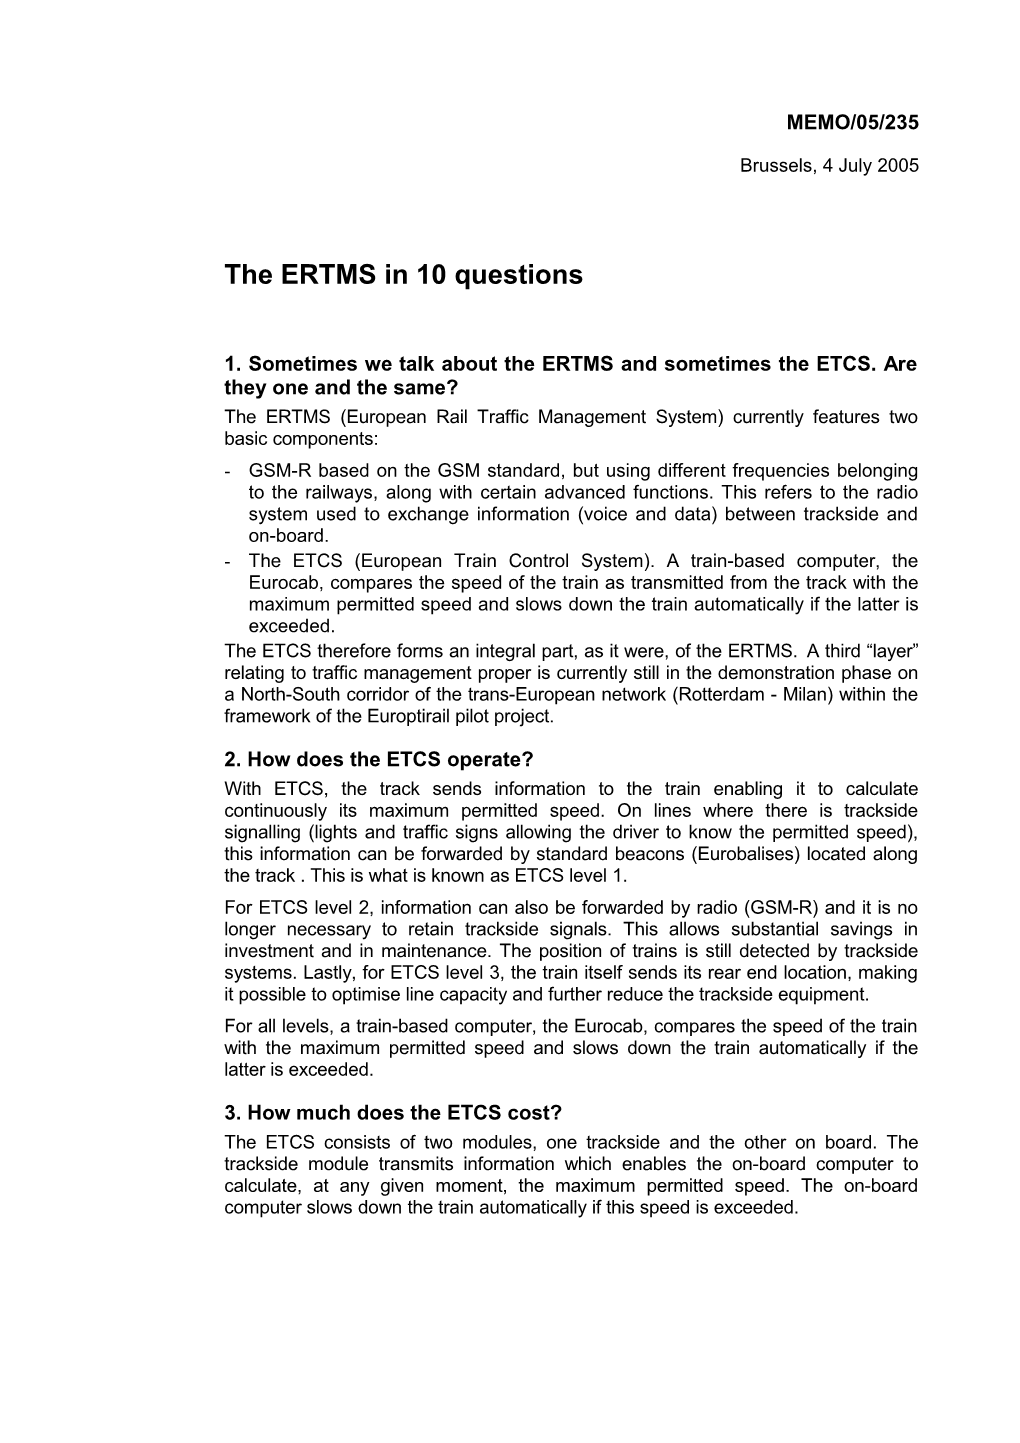 The ERTMS in 10 Questions